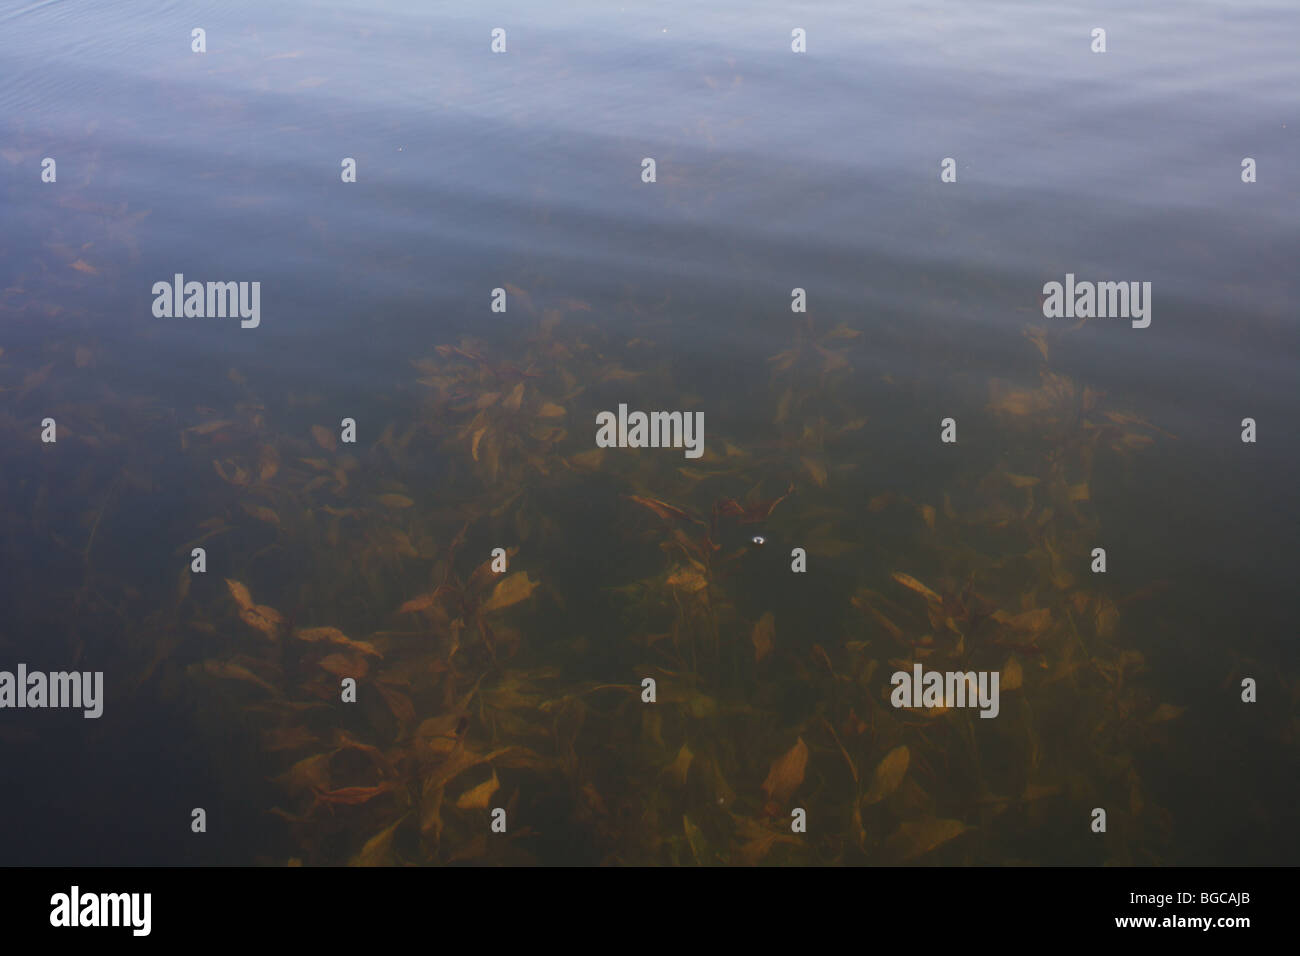 Reeds lilly pads and structure underwater under surface of water good excellent large mouth bass fishing habitat Stock Photo